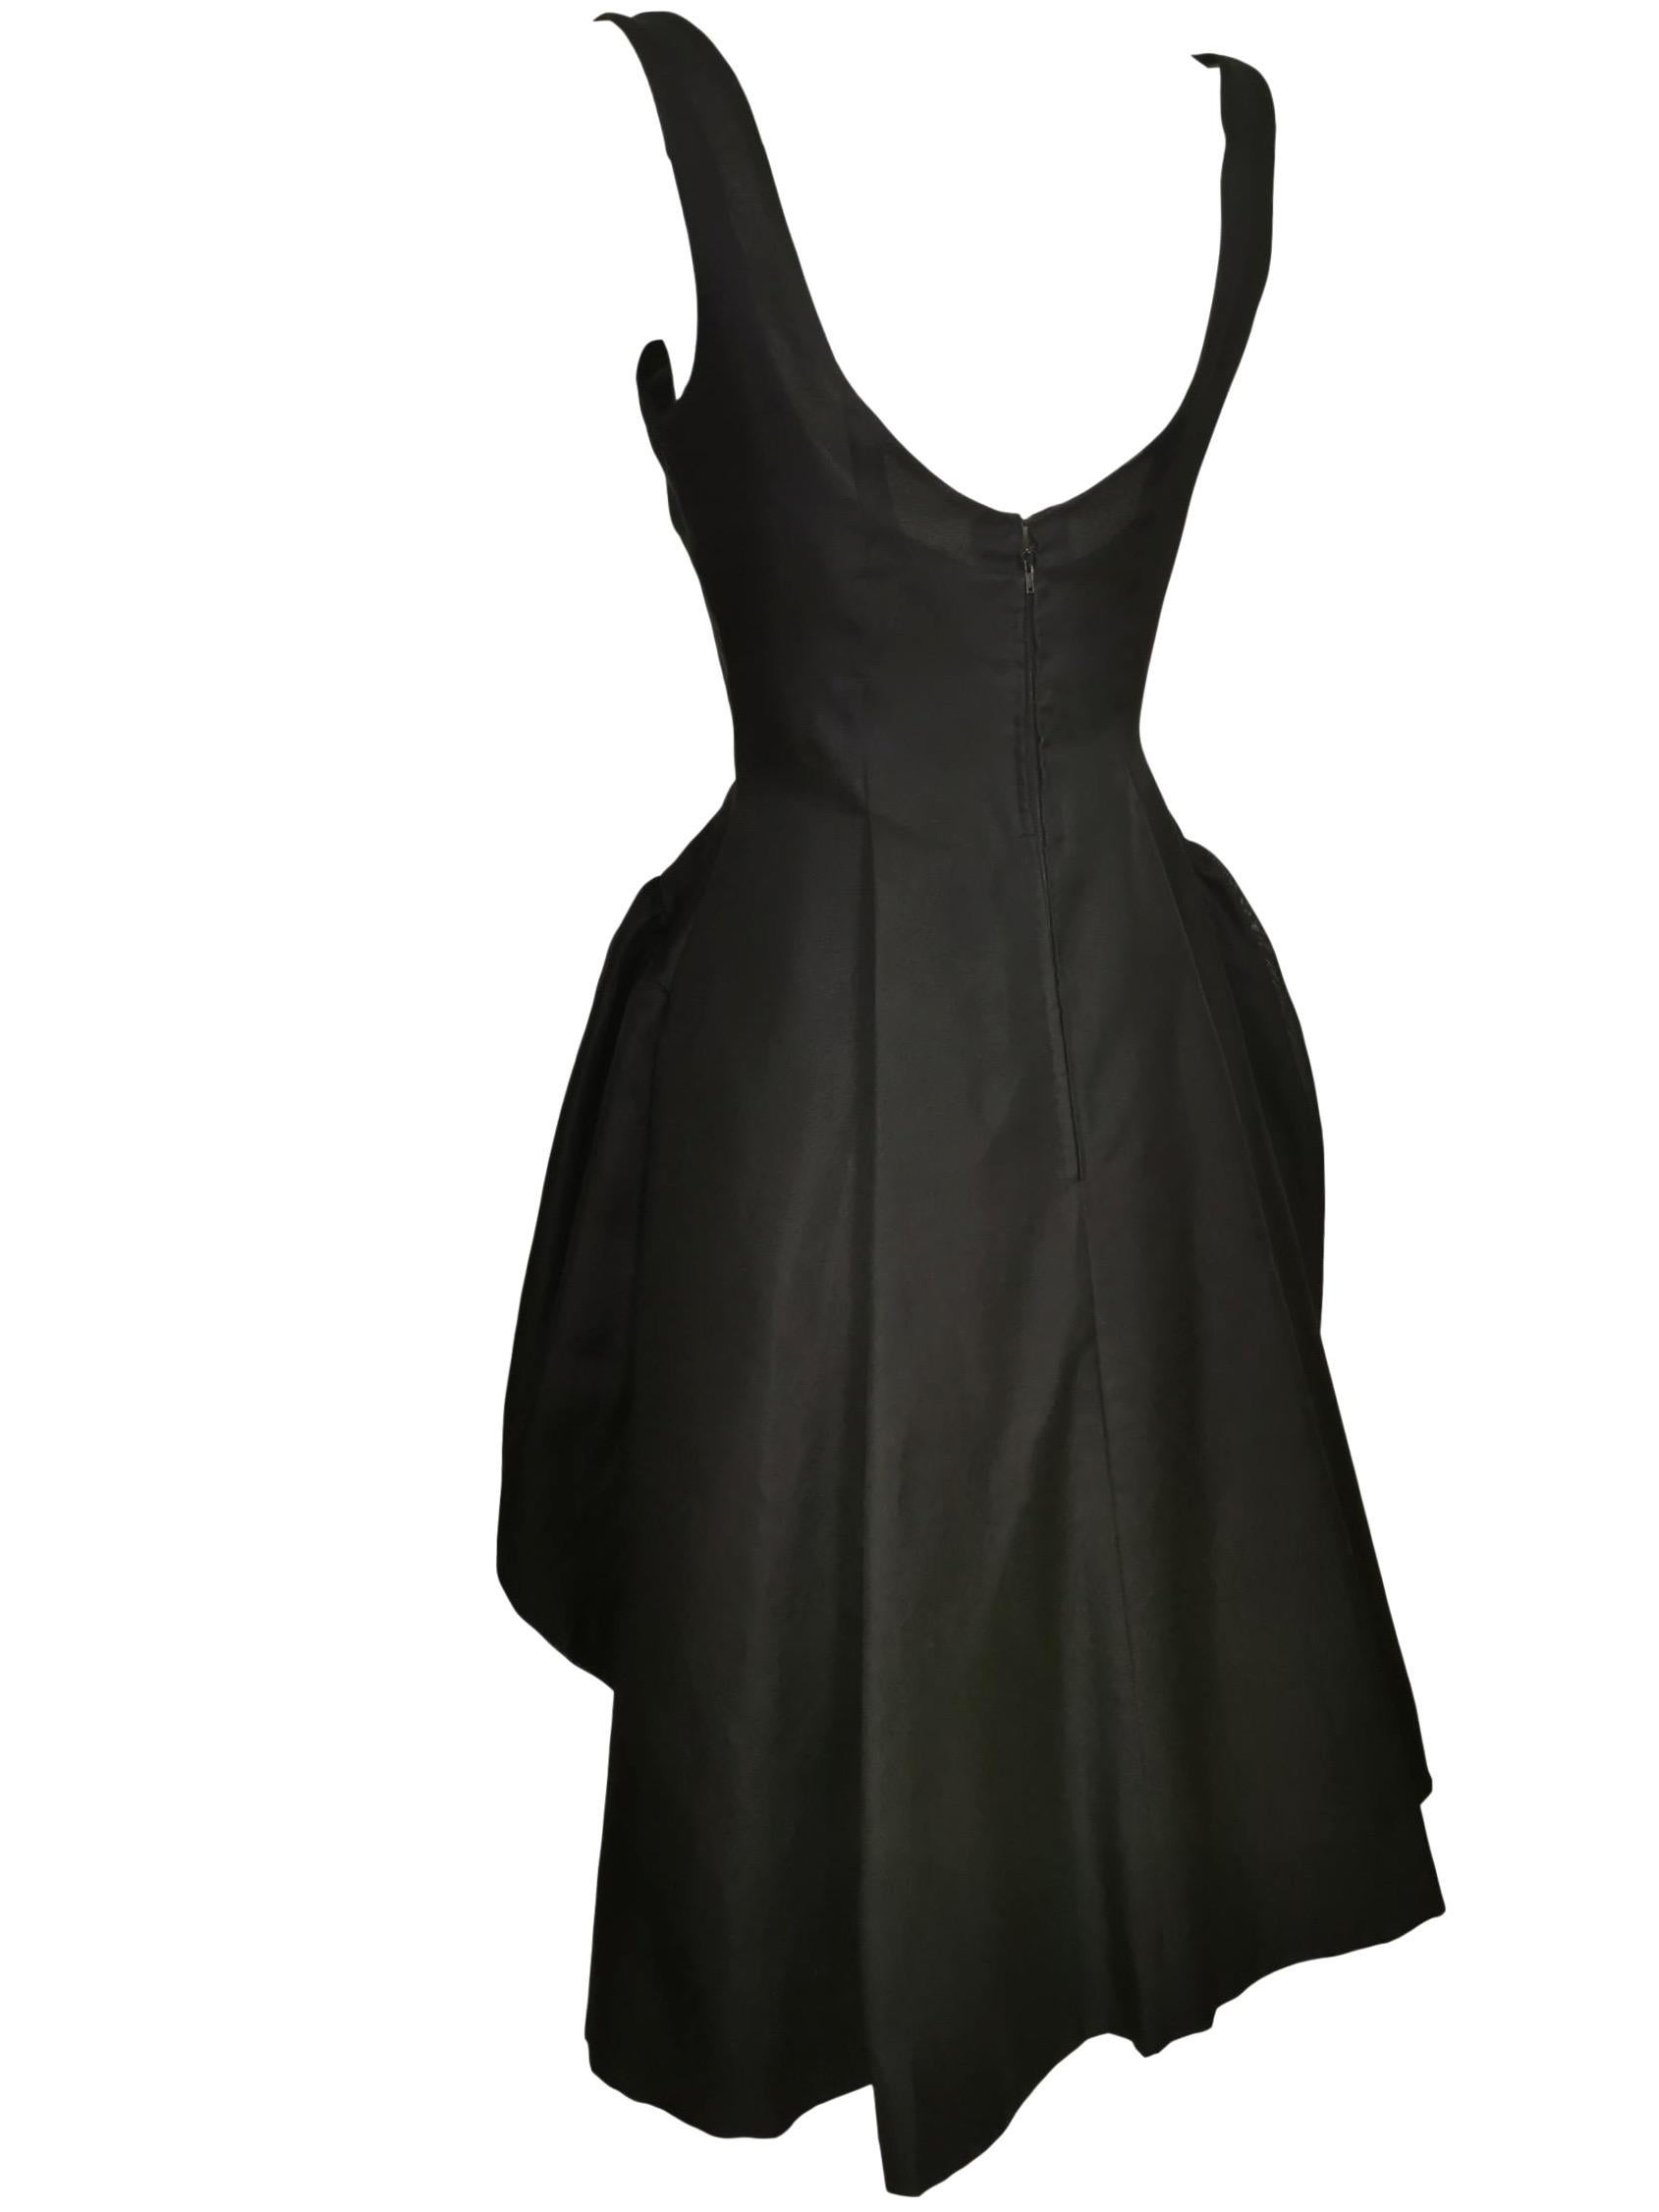 Jacques Heim Silk Gazar Dress Numbered Exclusive to Harrods For Sale 2